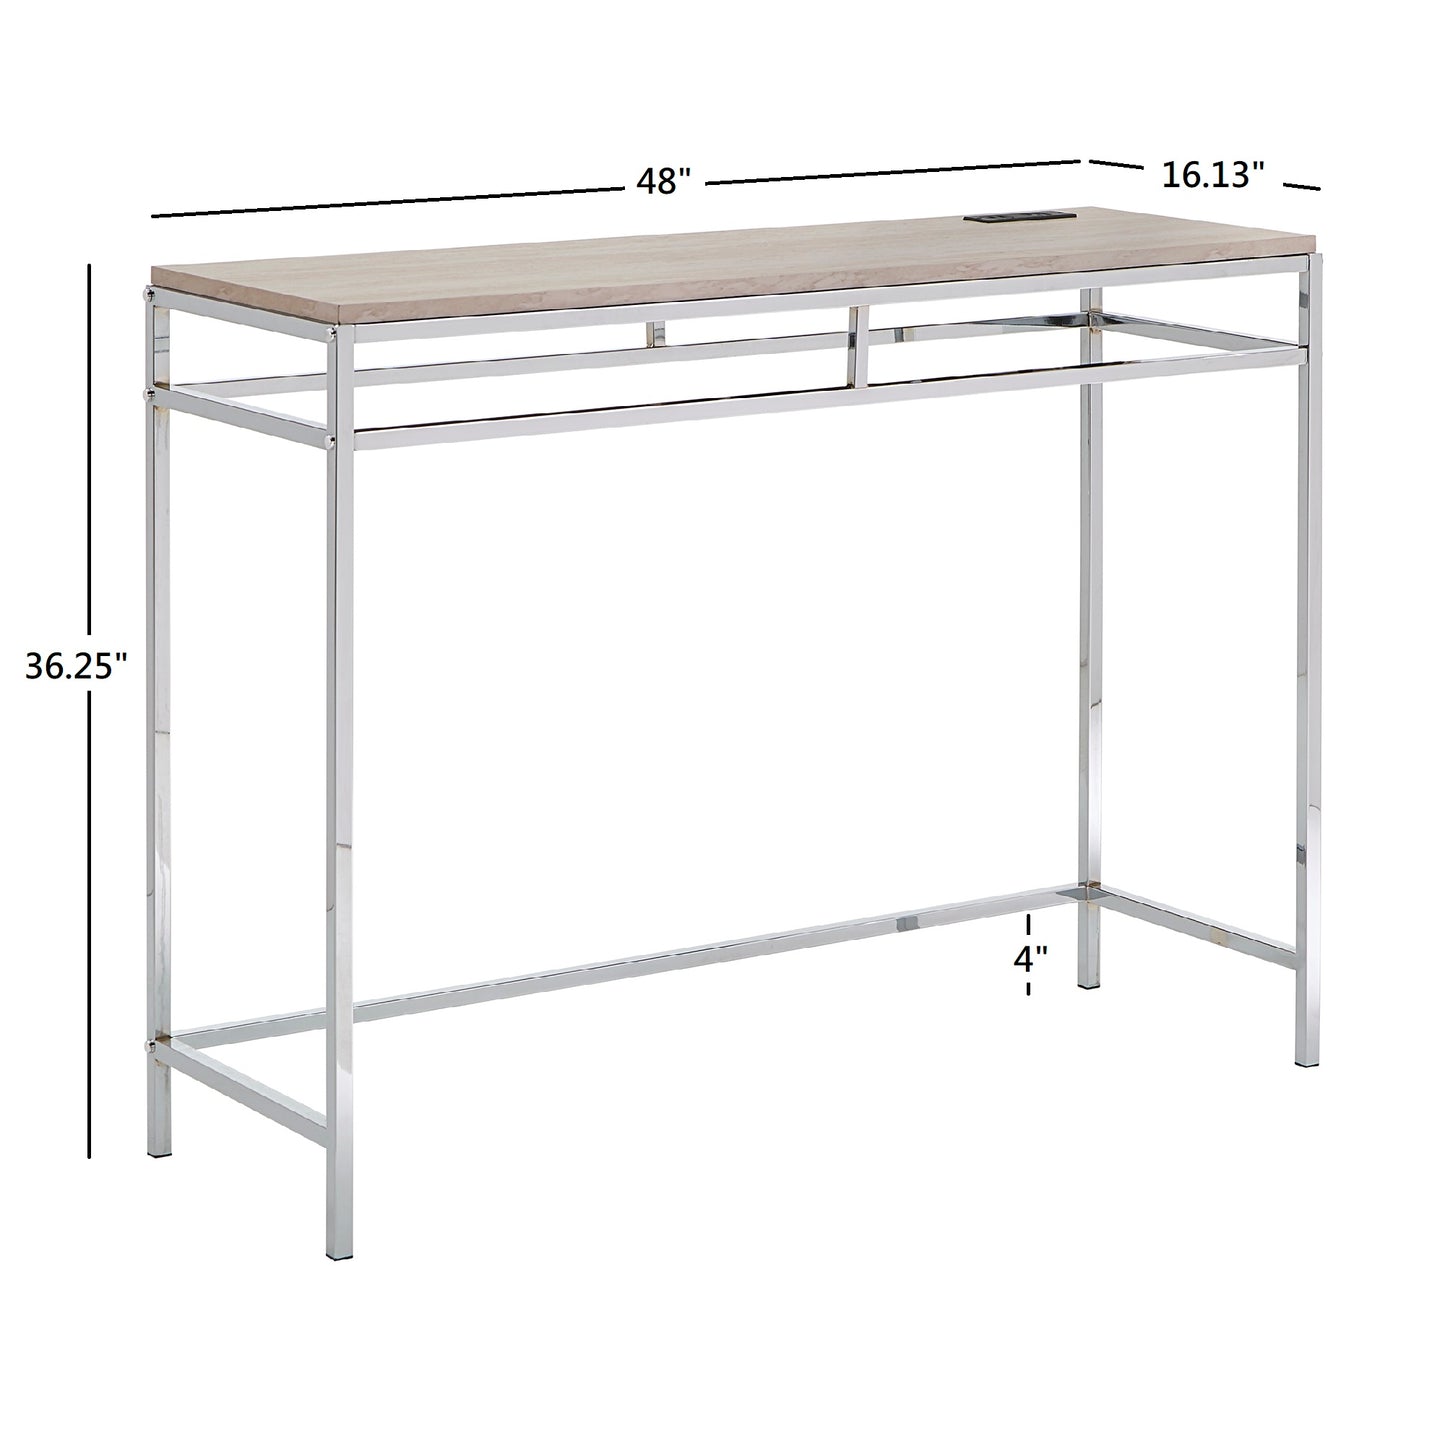 Chrome Finish Counter Height Desk with Faux Marble Top and USB Charging Port